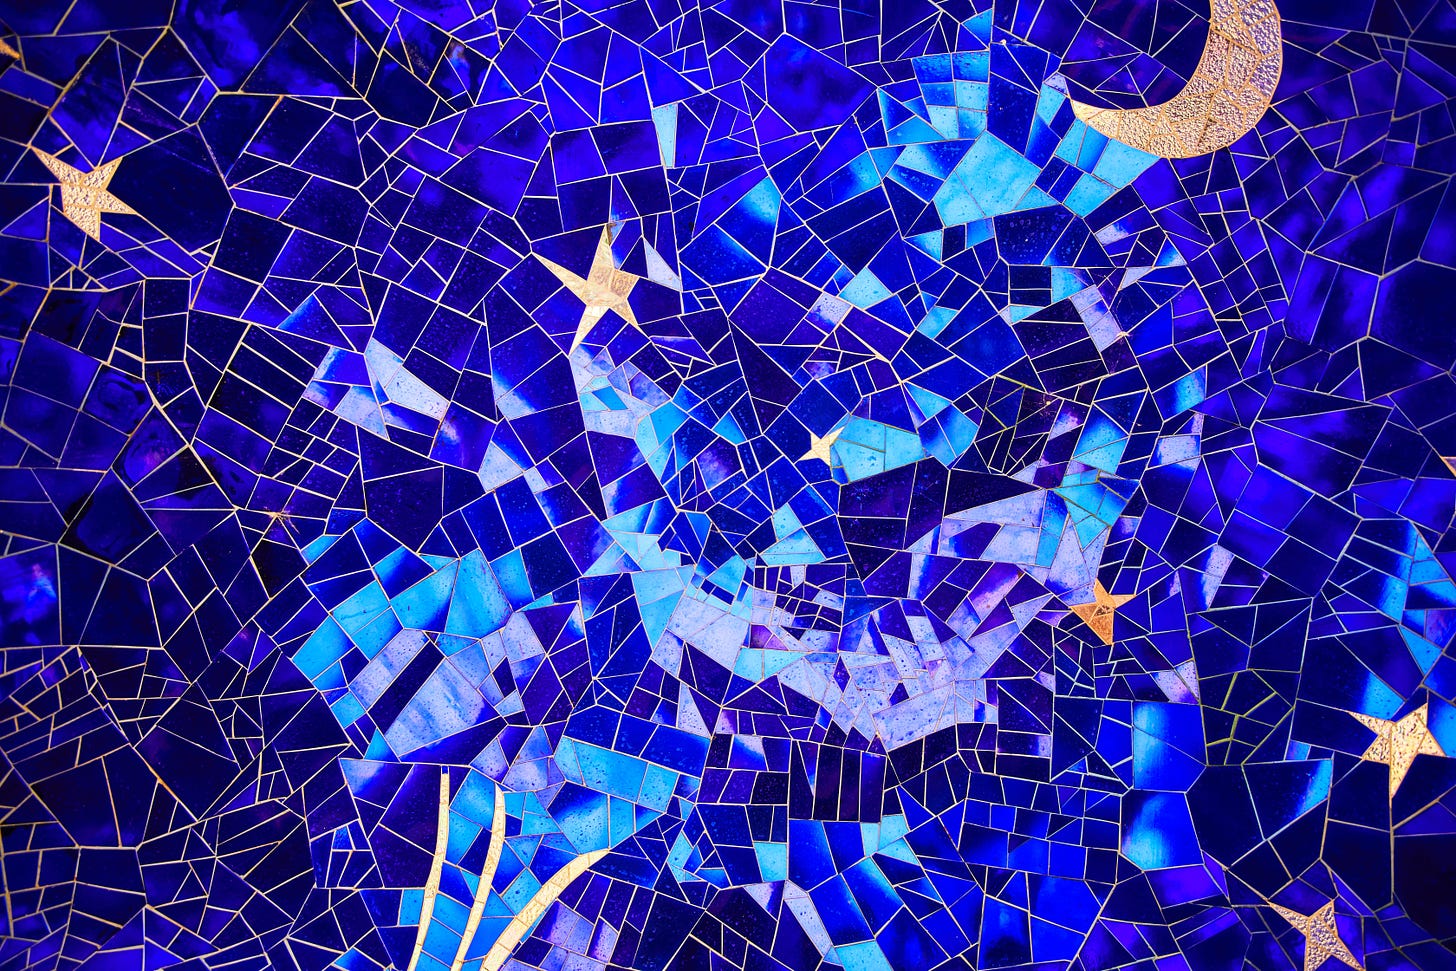 A mosaic made up of irregular pieces that look like colored glass, depicting a handful of golden stars against a dark blue sky.